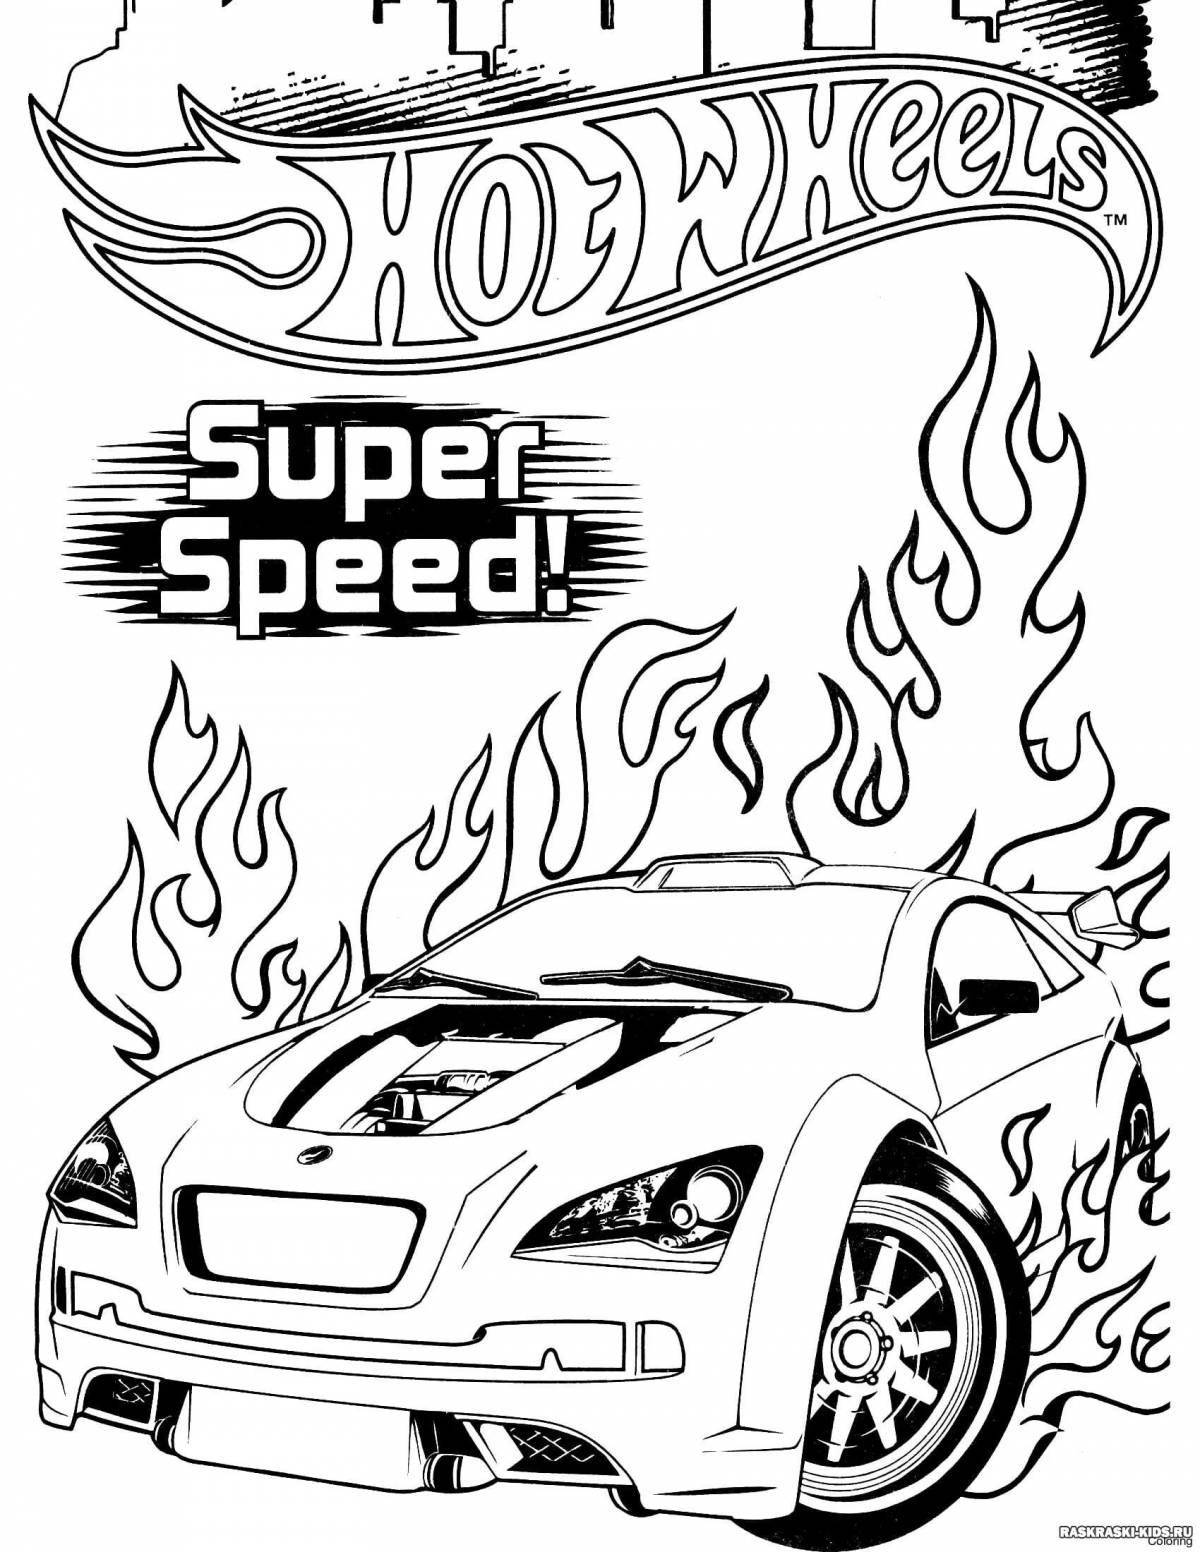 Animated hot wheels motorcycle coloring page